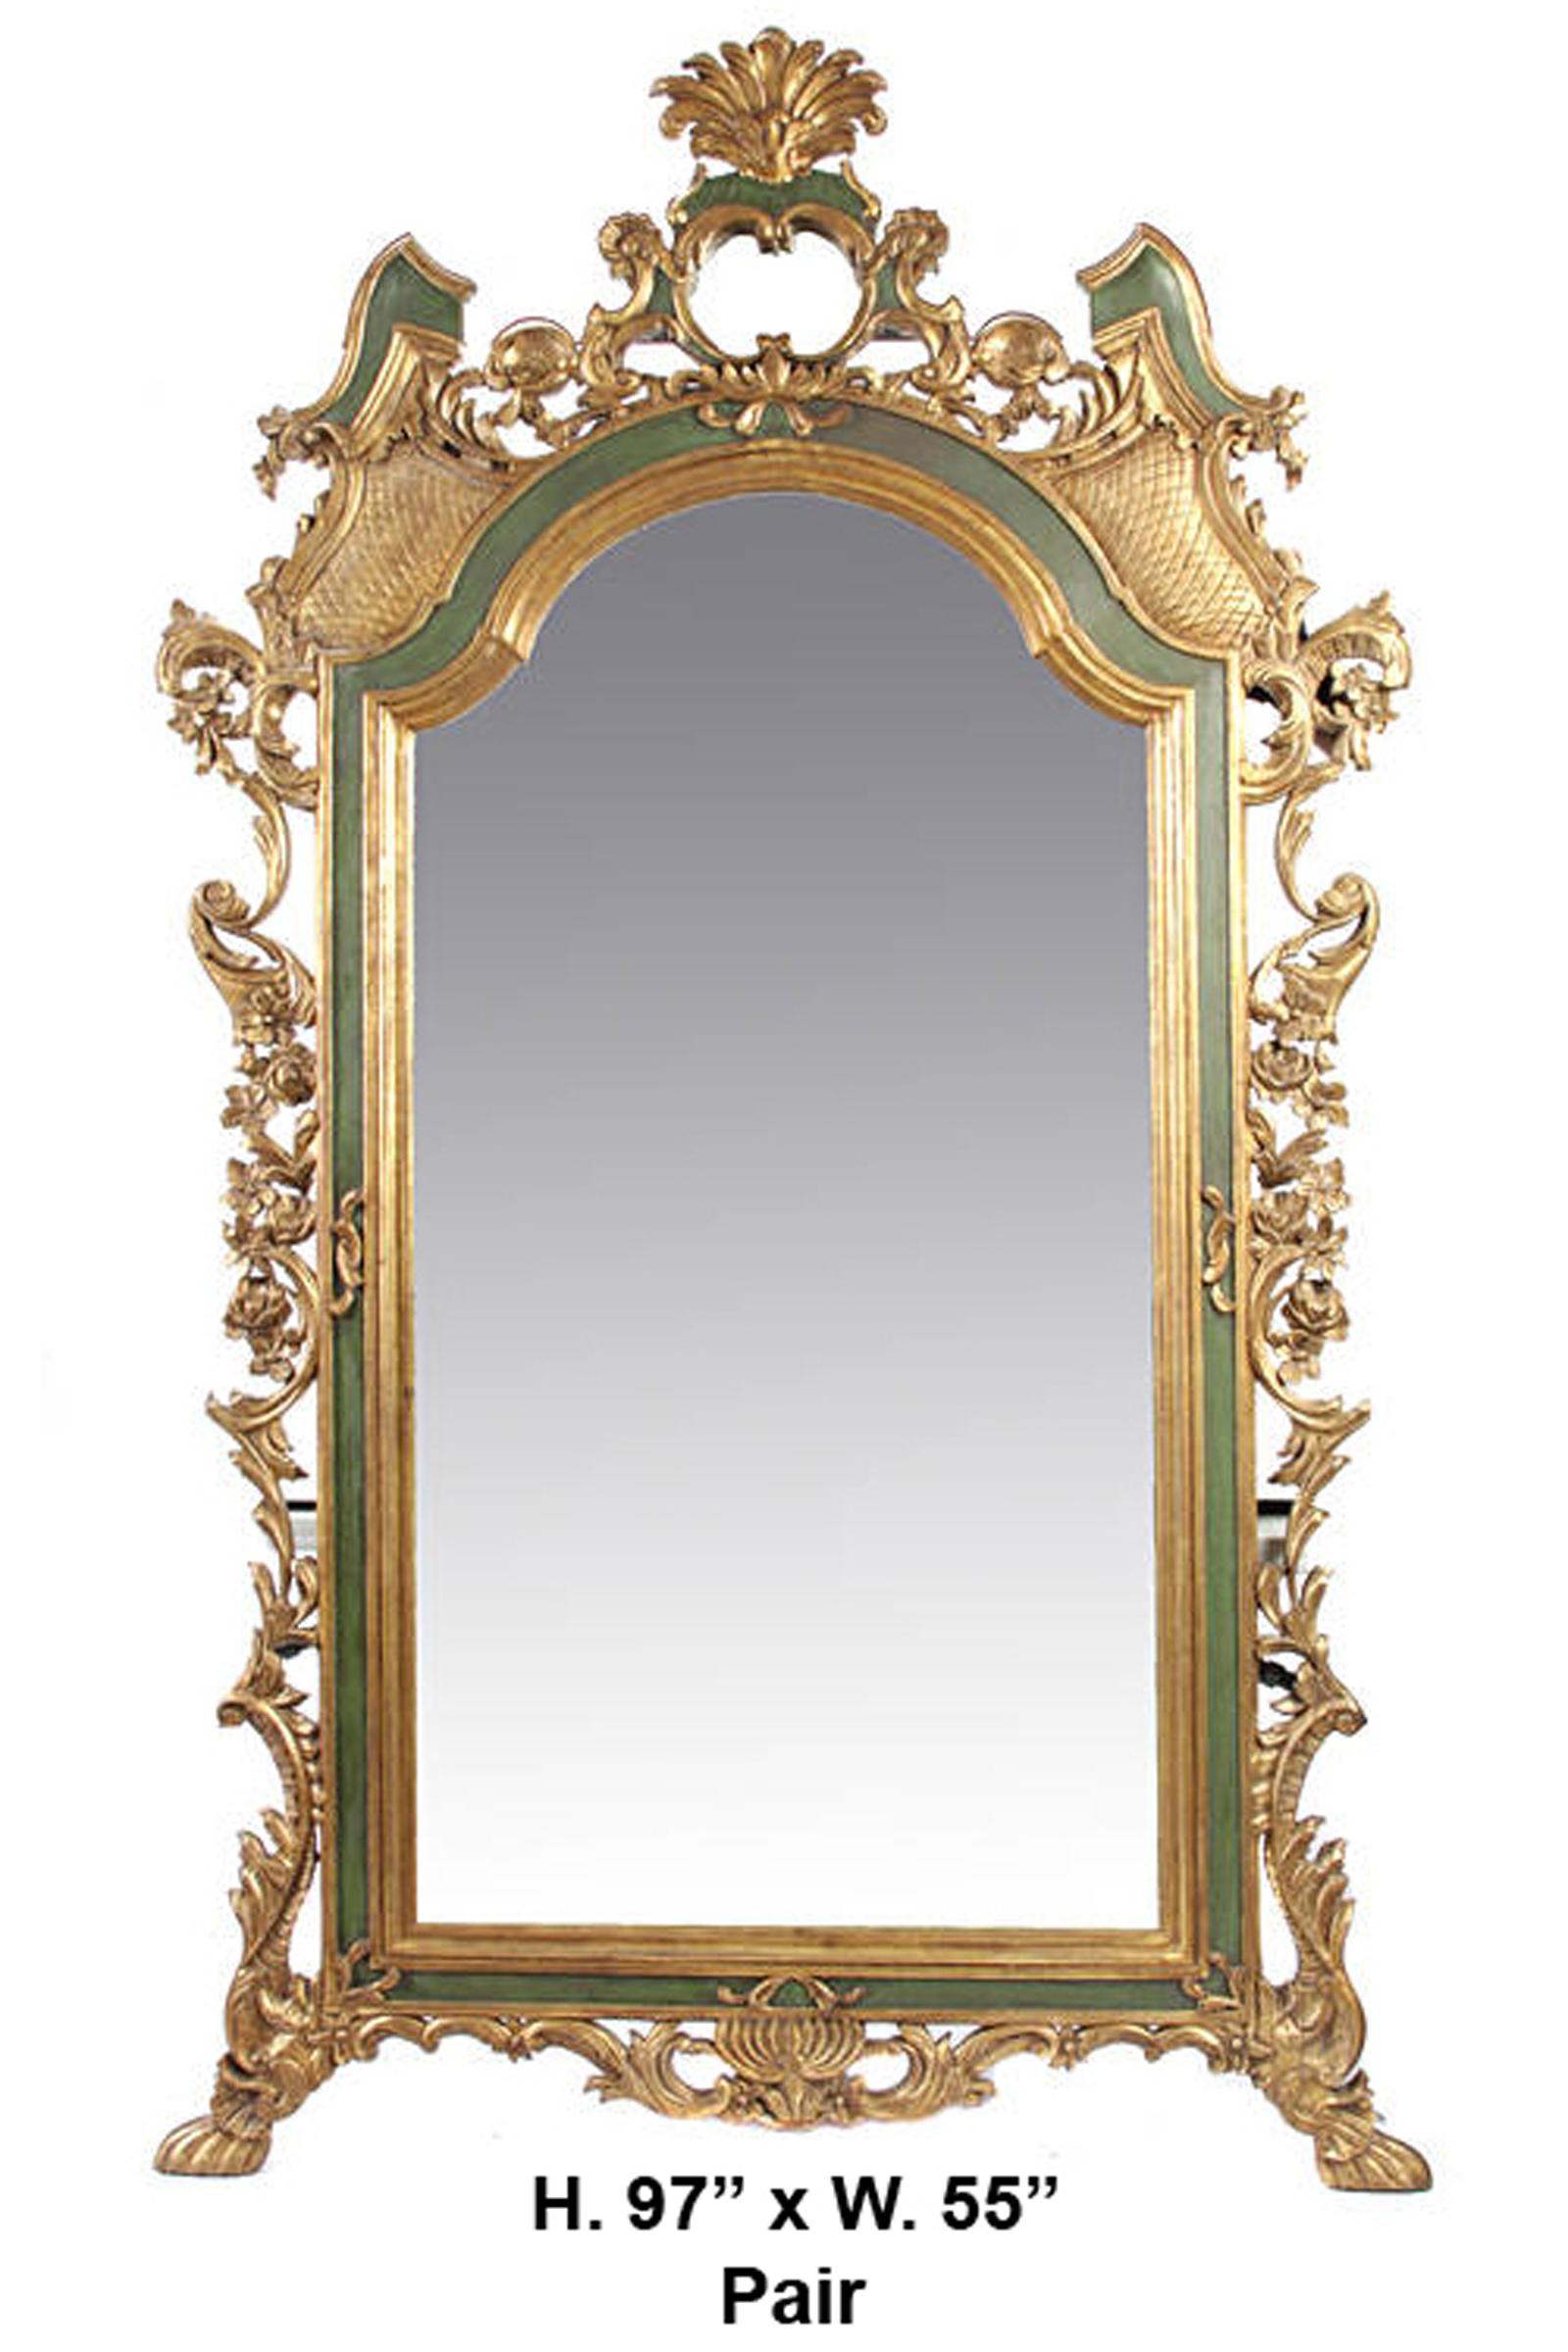 Hand-Crafted Pair of Italian Rococo Style Painted Mirrors